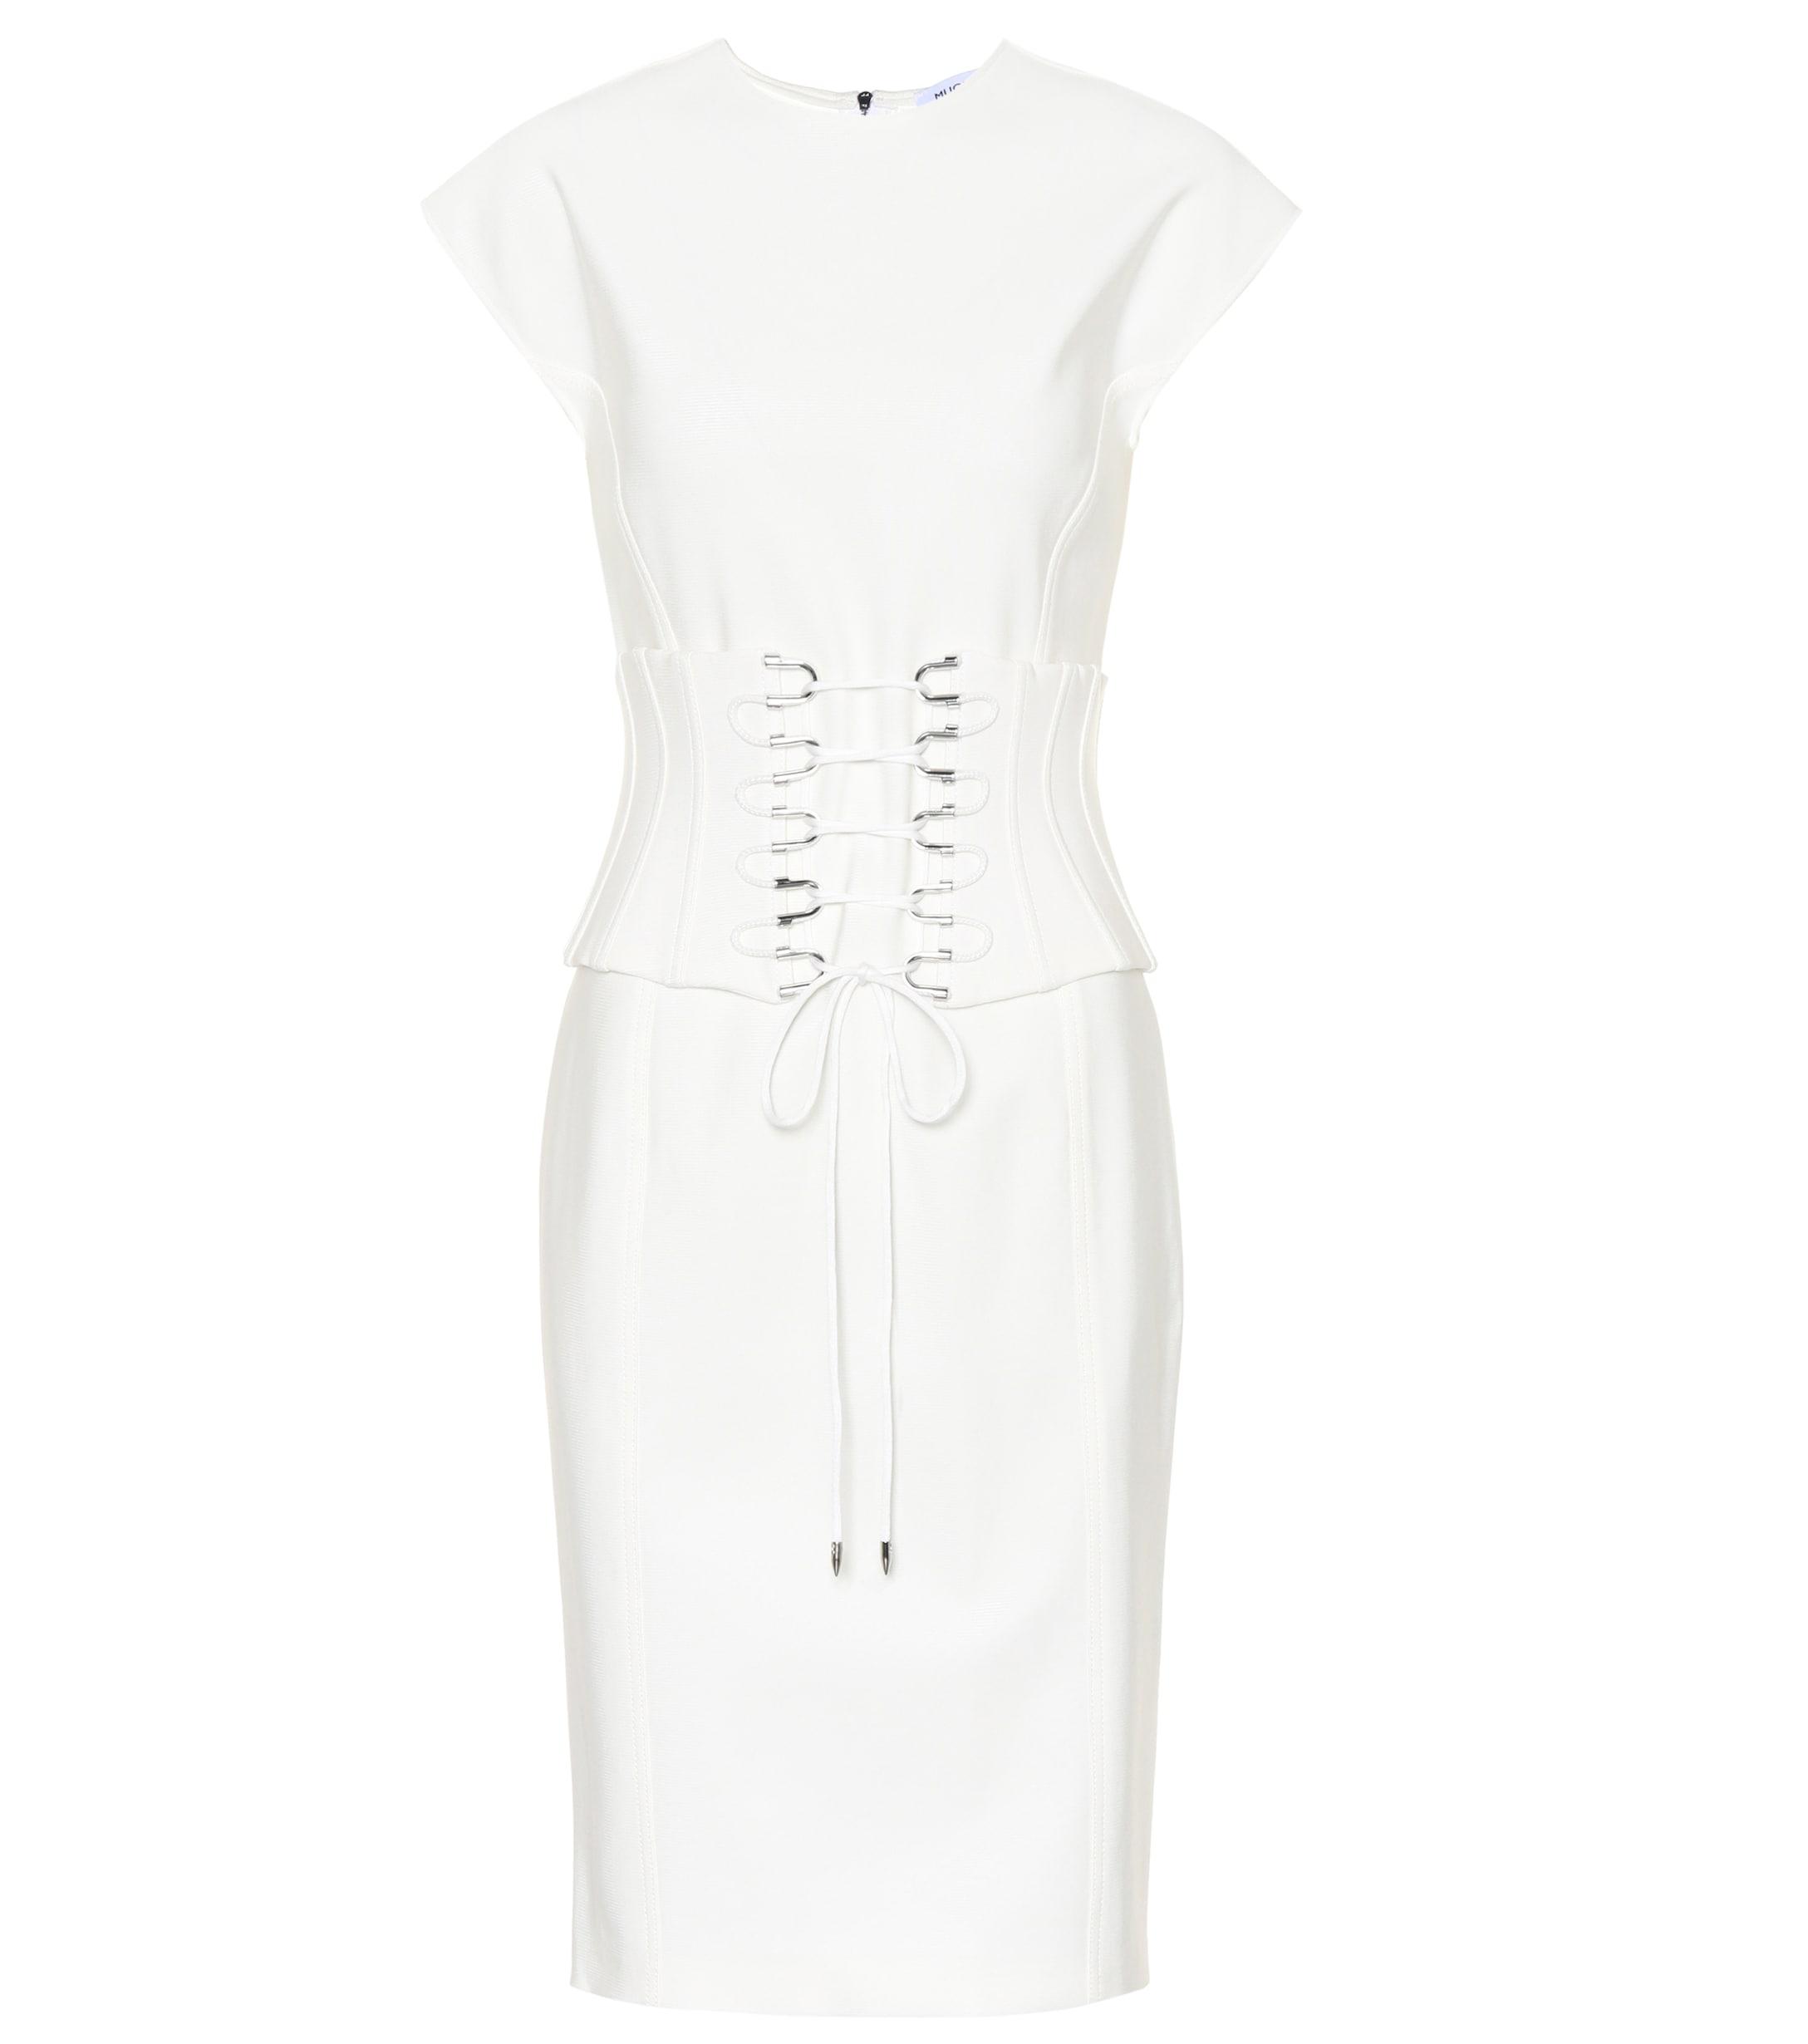 Mugler Synthetic Stretch-jersey Corset Dress in White - Lyst